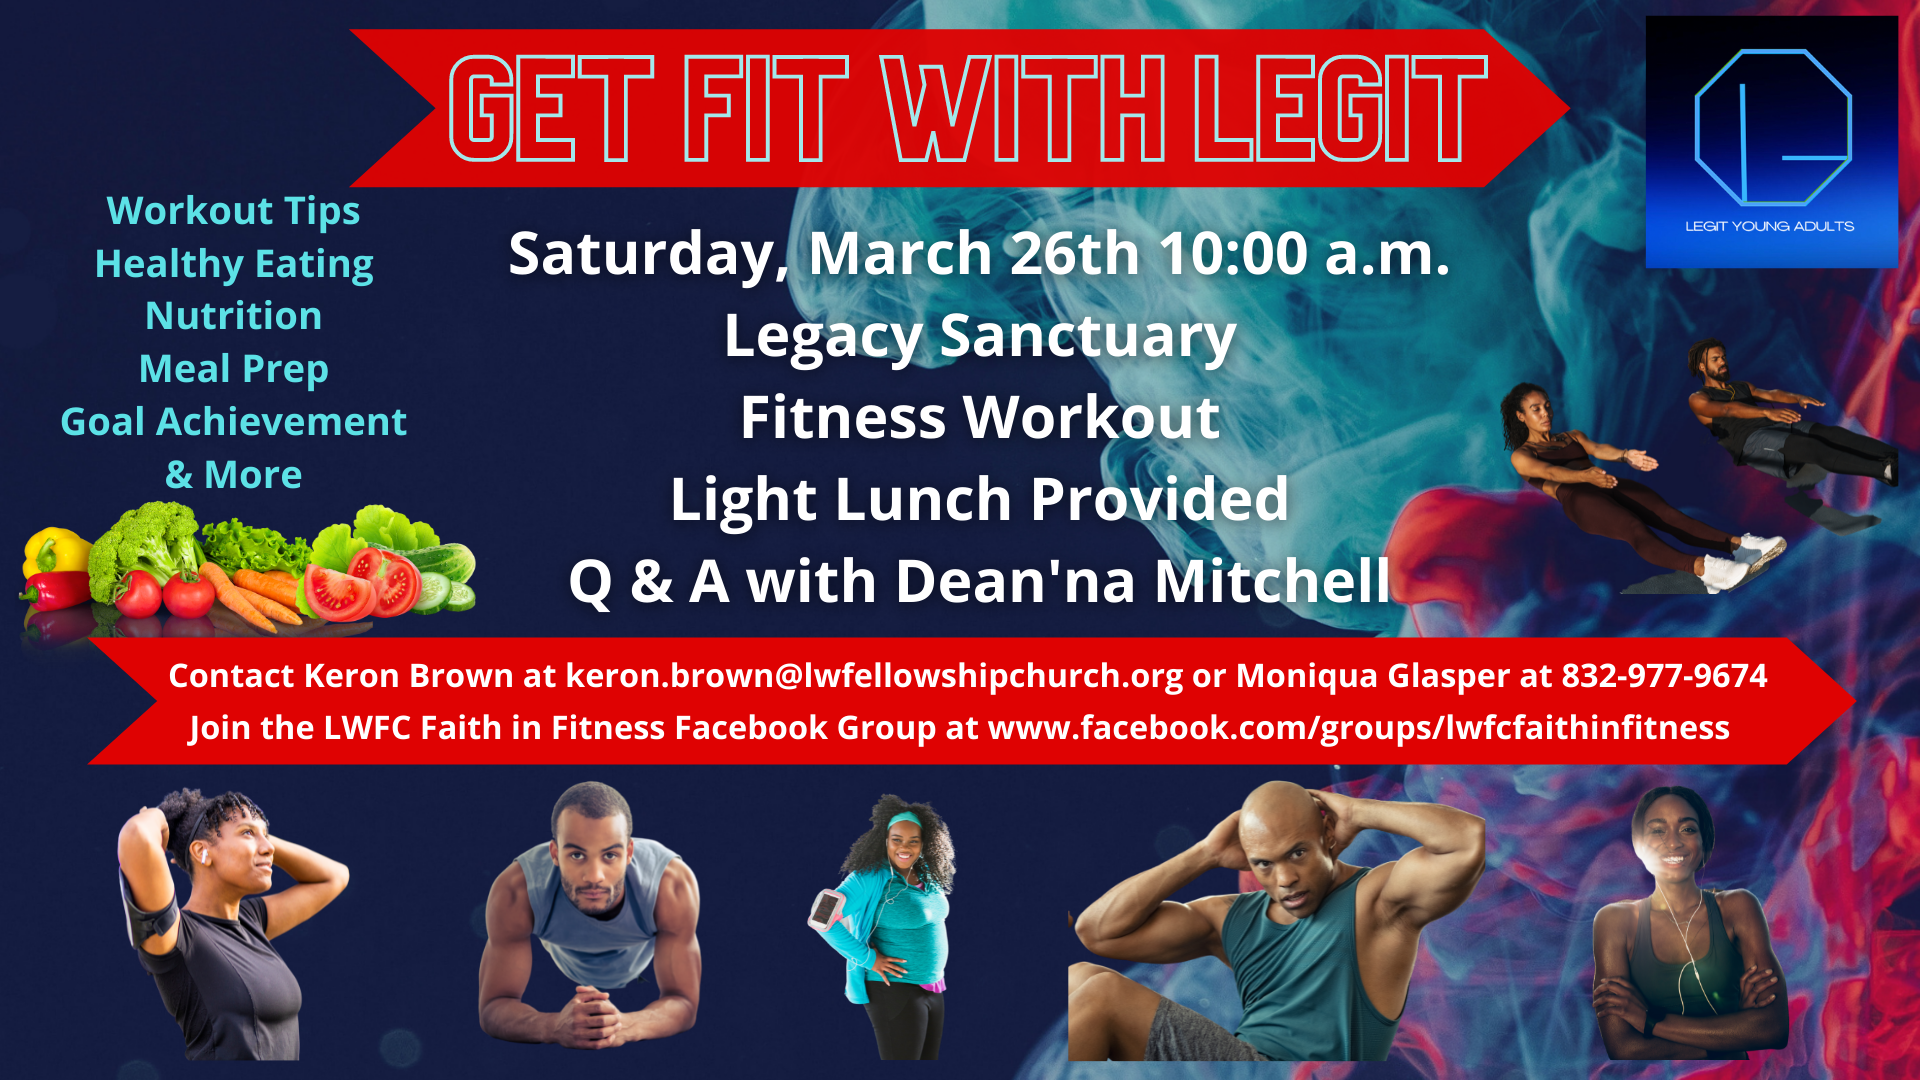 GET FIT WITH LEGIT – March 26th 10:00 a.m. head image